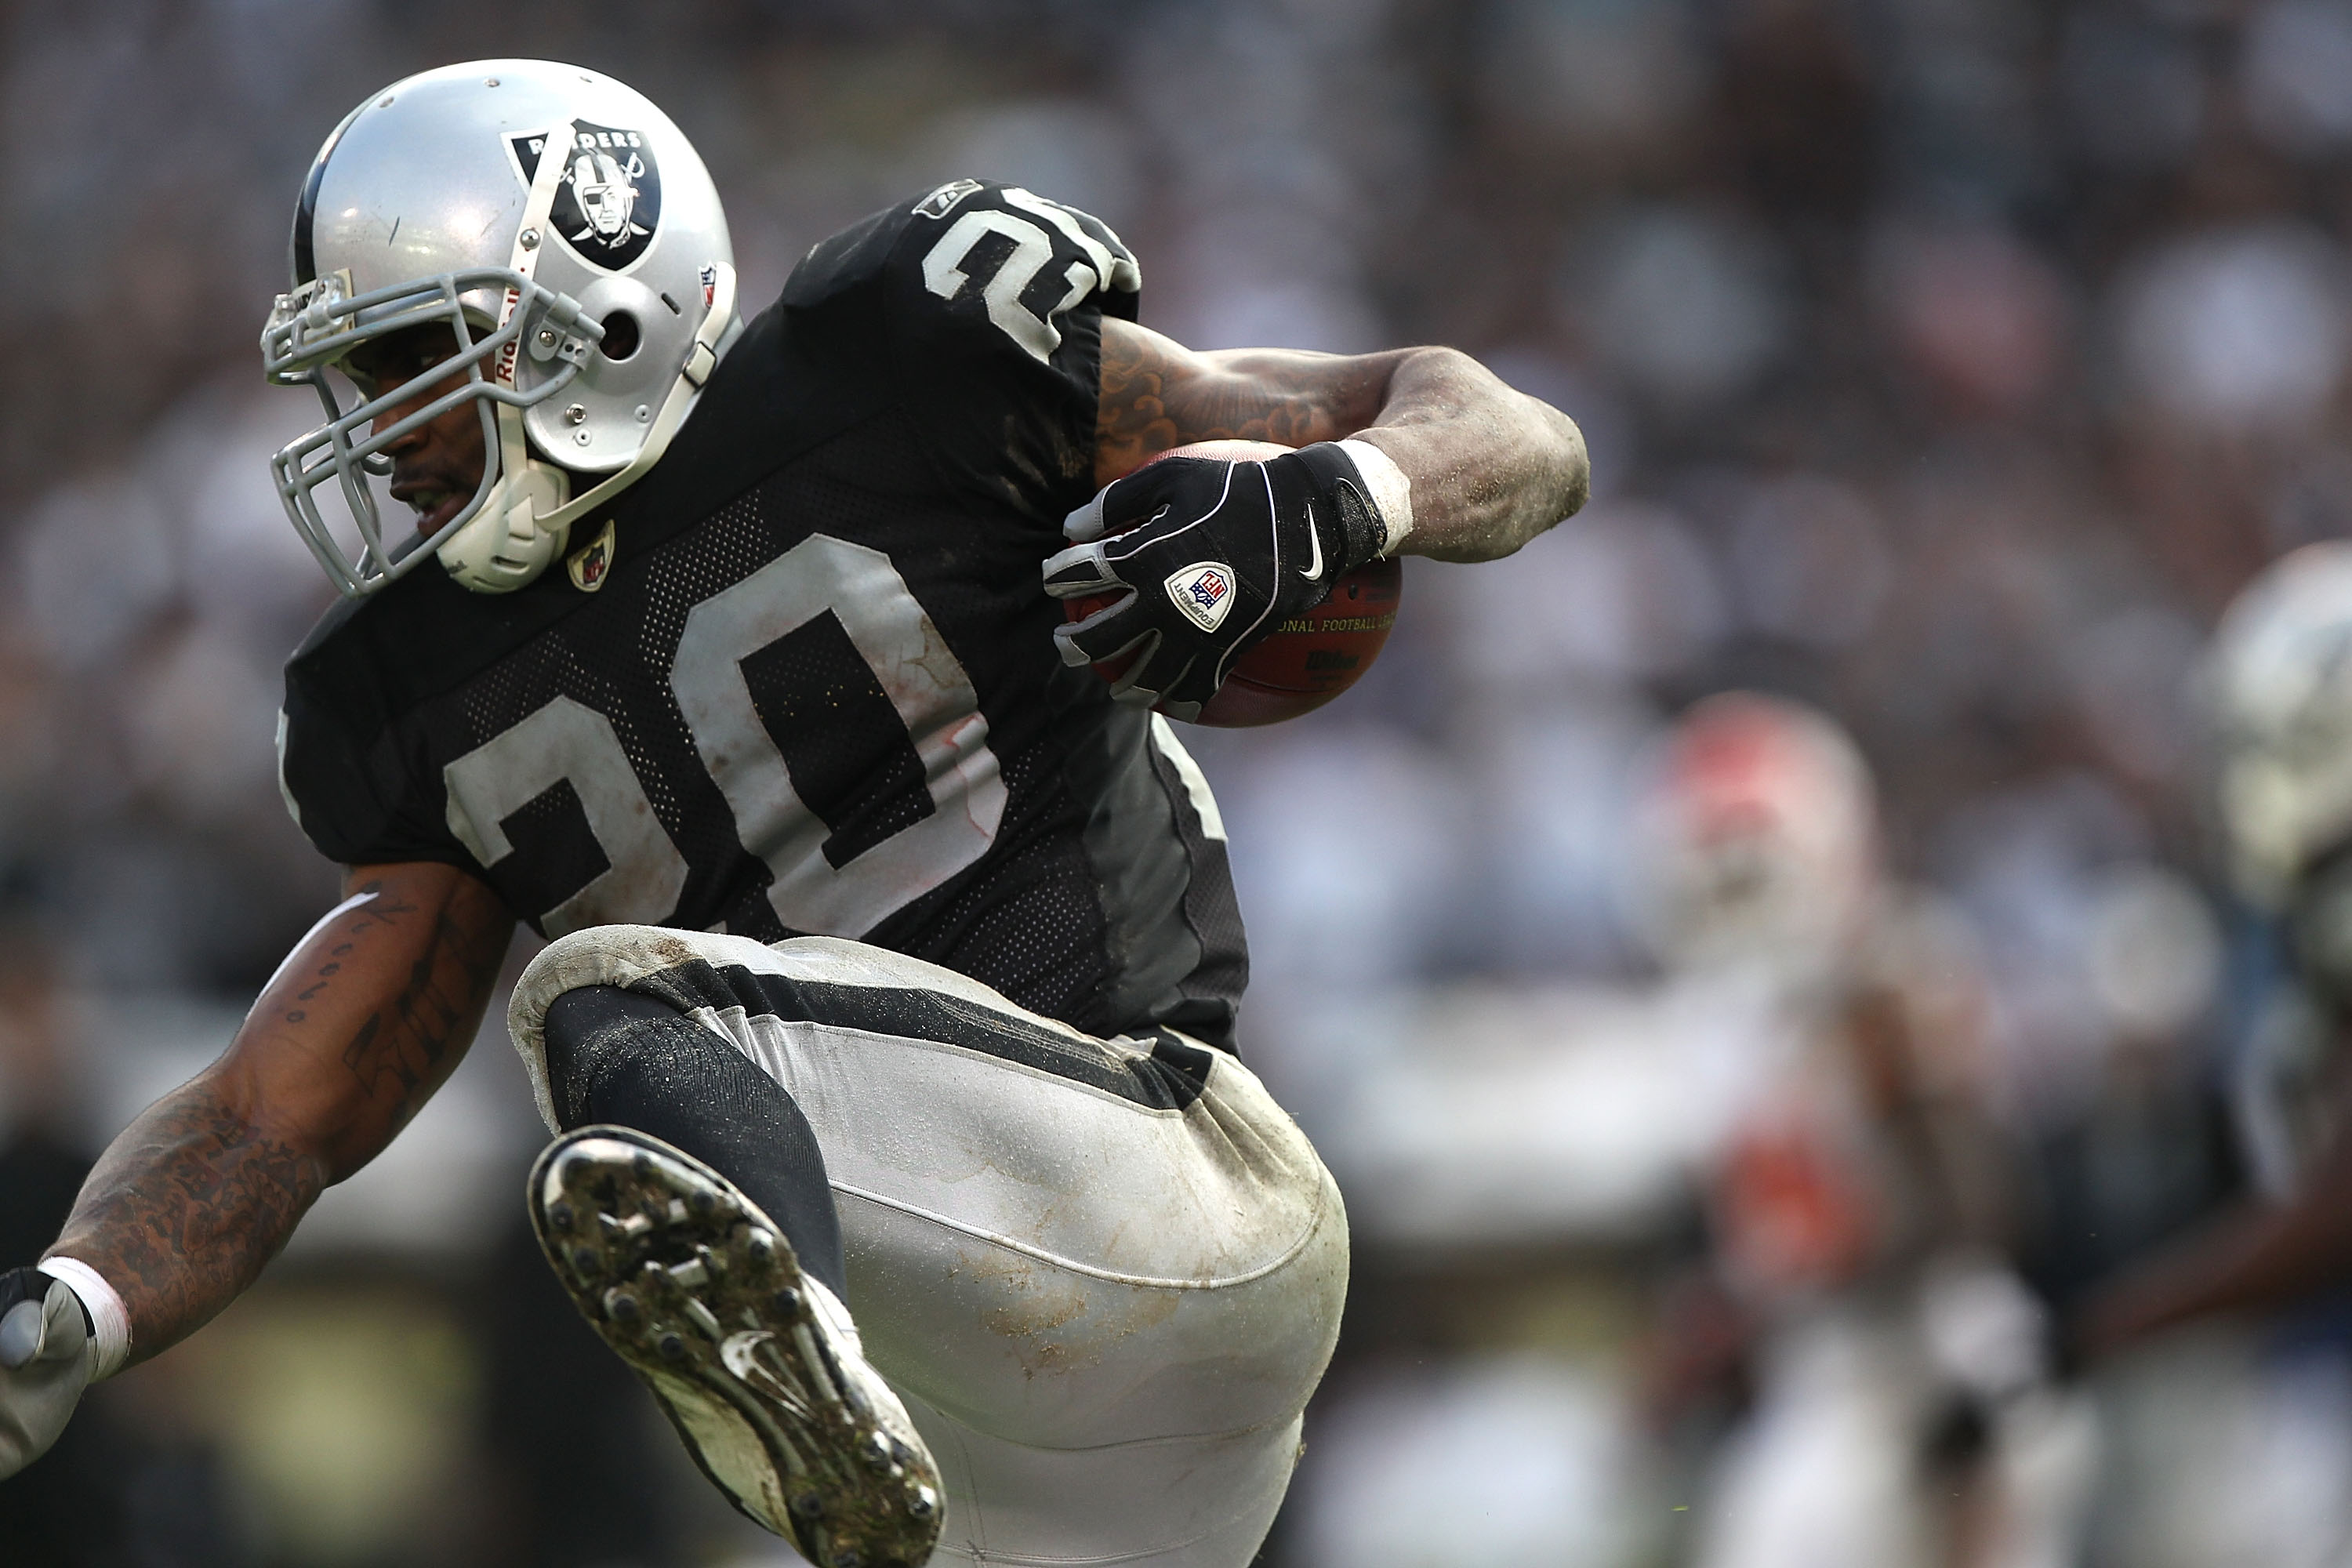 OAKLAND, CA - NOVEMBER 07:  Darren McFadden #20 of the Oakland Raiders runs against the Kansas City Chiefs during an NFL game at Oakland-Alameda County Coliseum on November 7, 2010 in Oakland, California.  (Photo by Jed Jacobsohn/Getty Images)